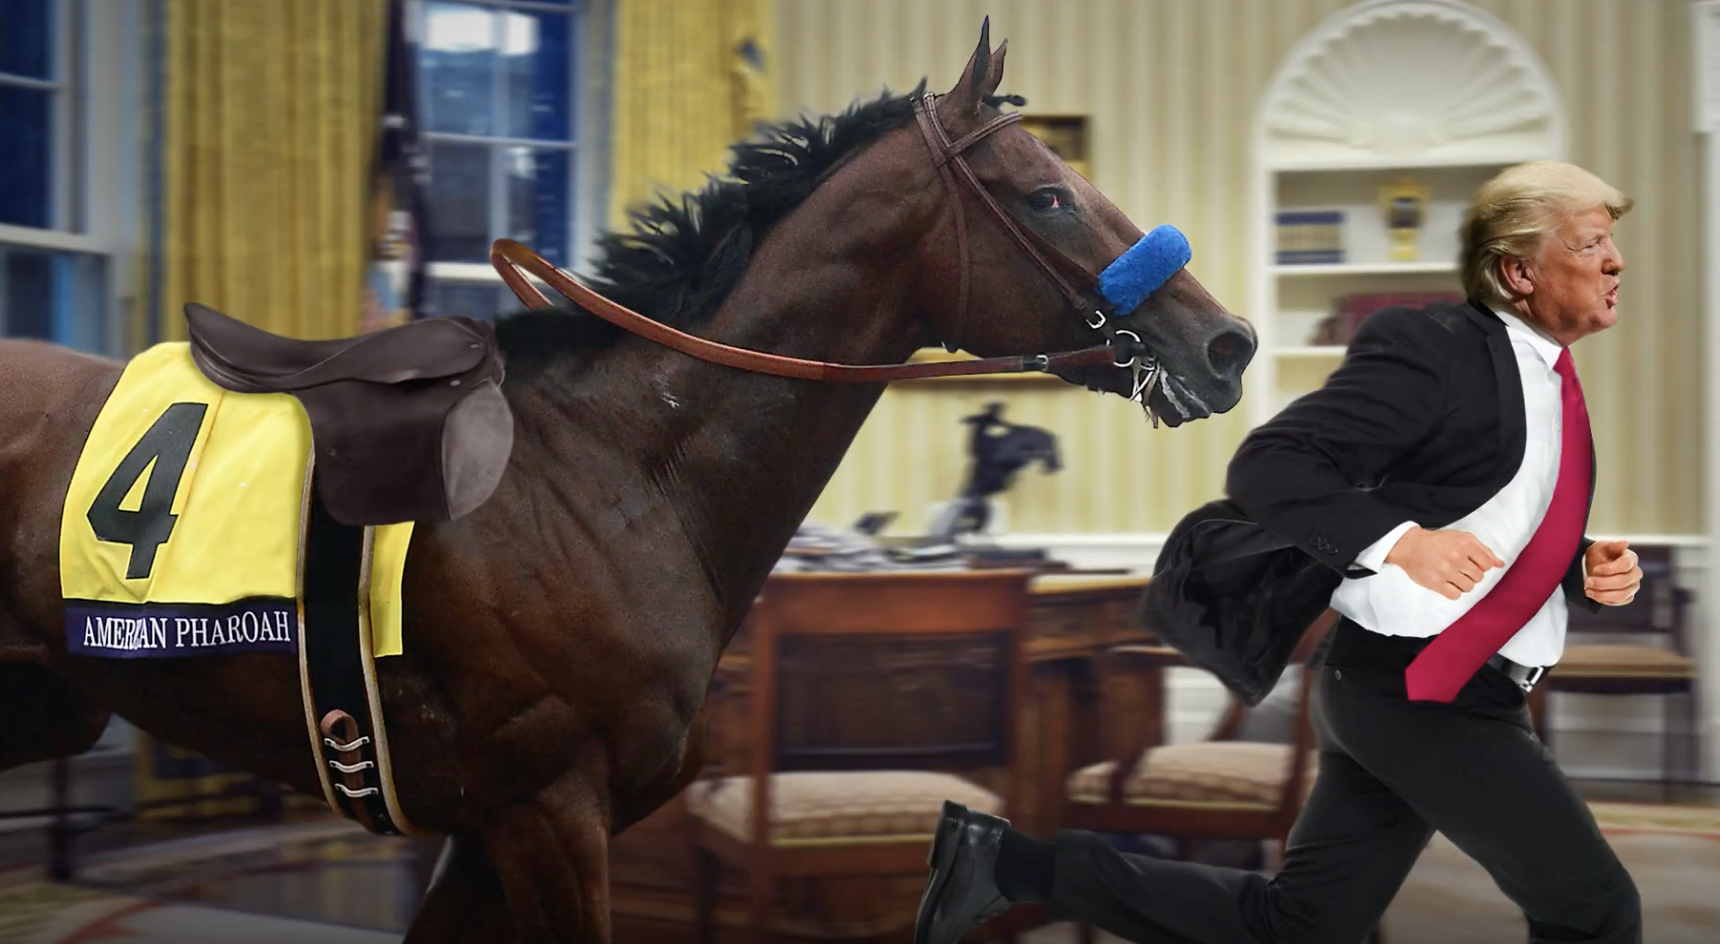 An illustration showing American Pharaoh chasing after Donald Trump.